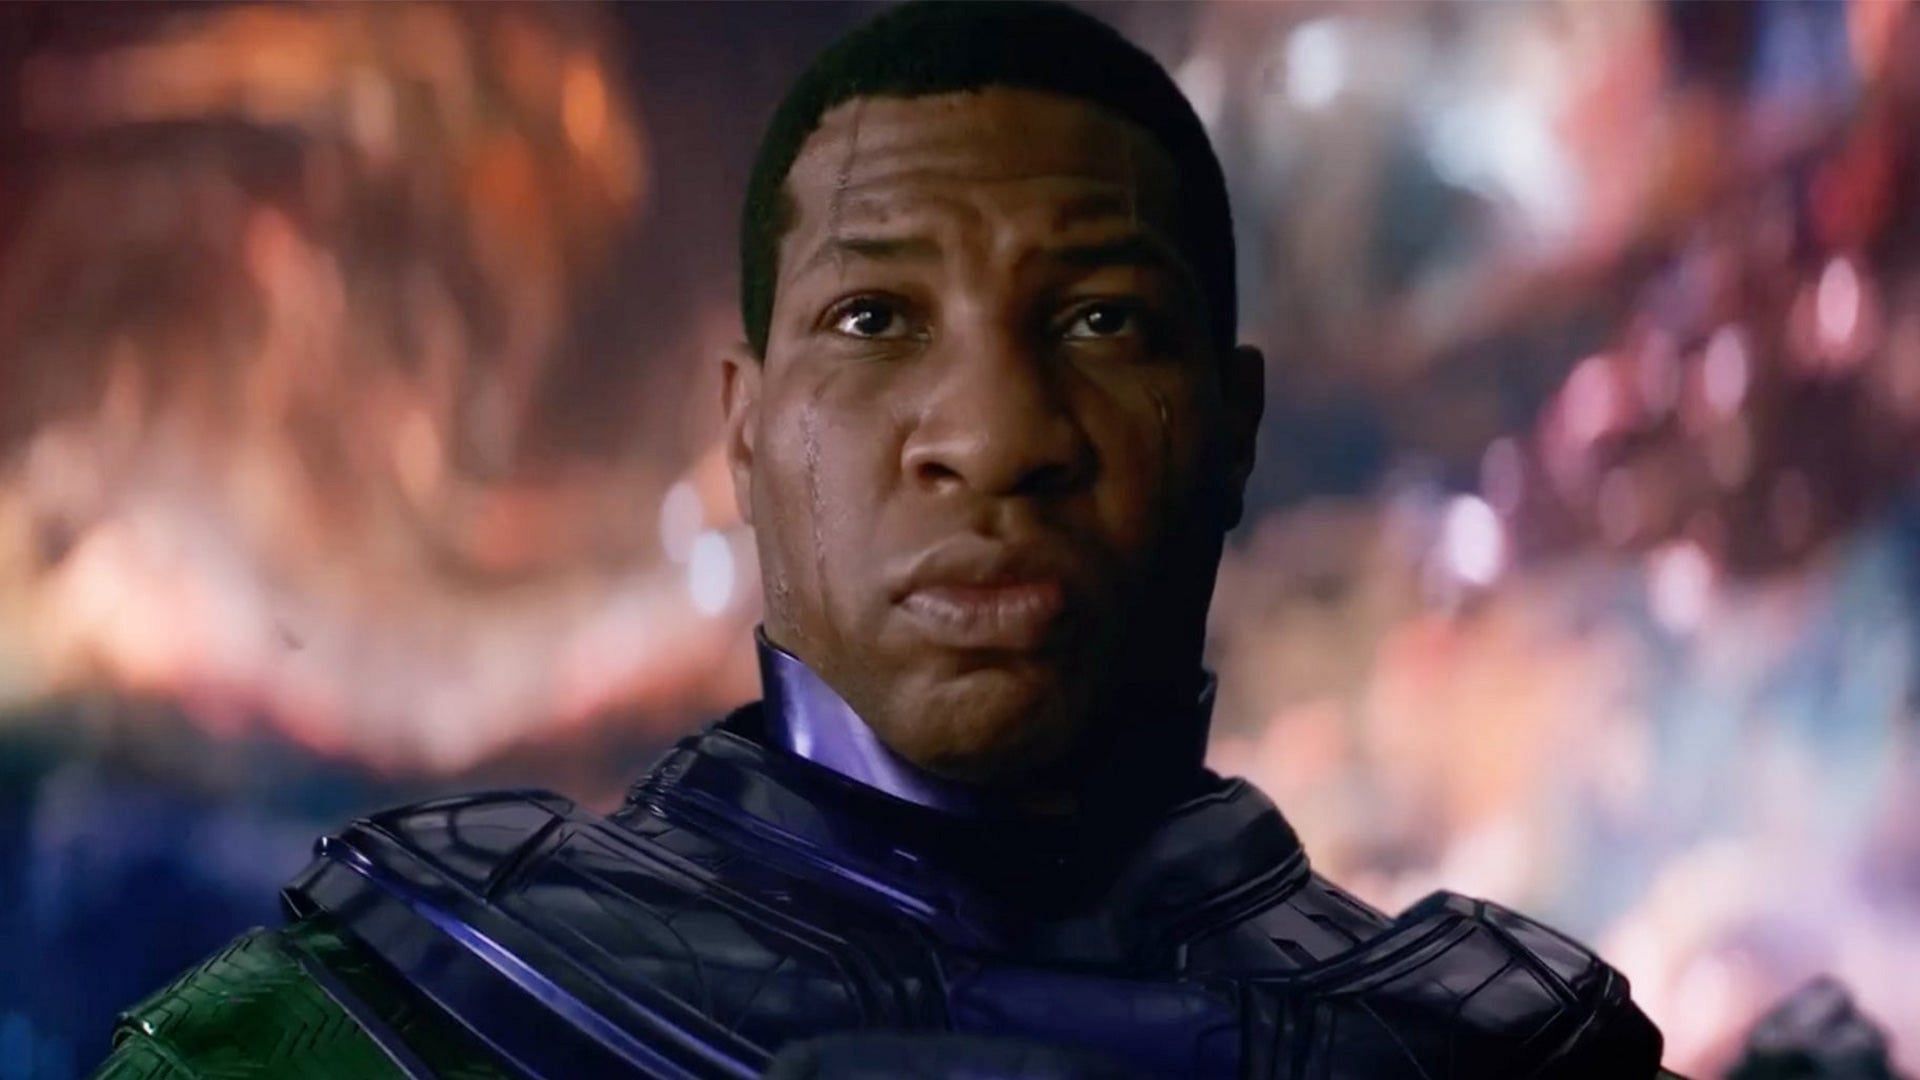 Marvel reportedly had an actor on standby for Kang before Jonathan Majors verdict